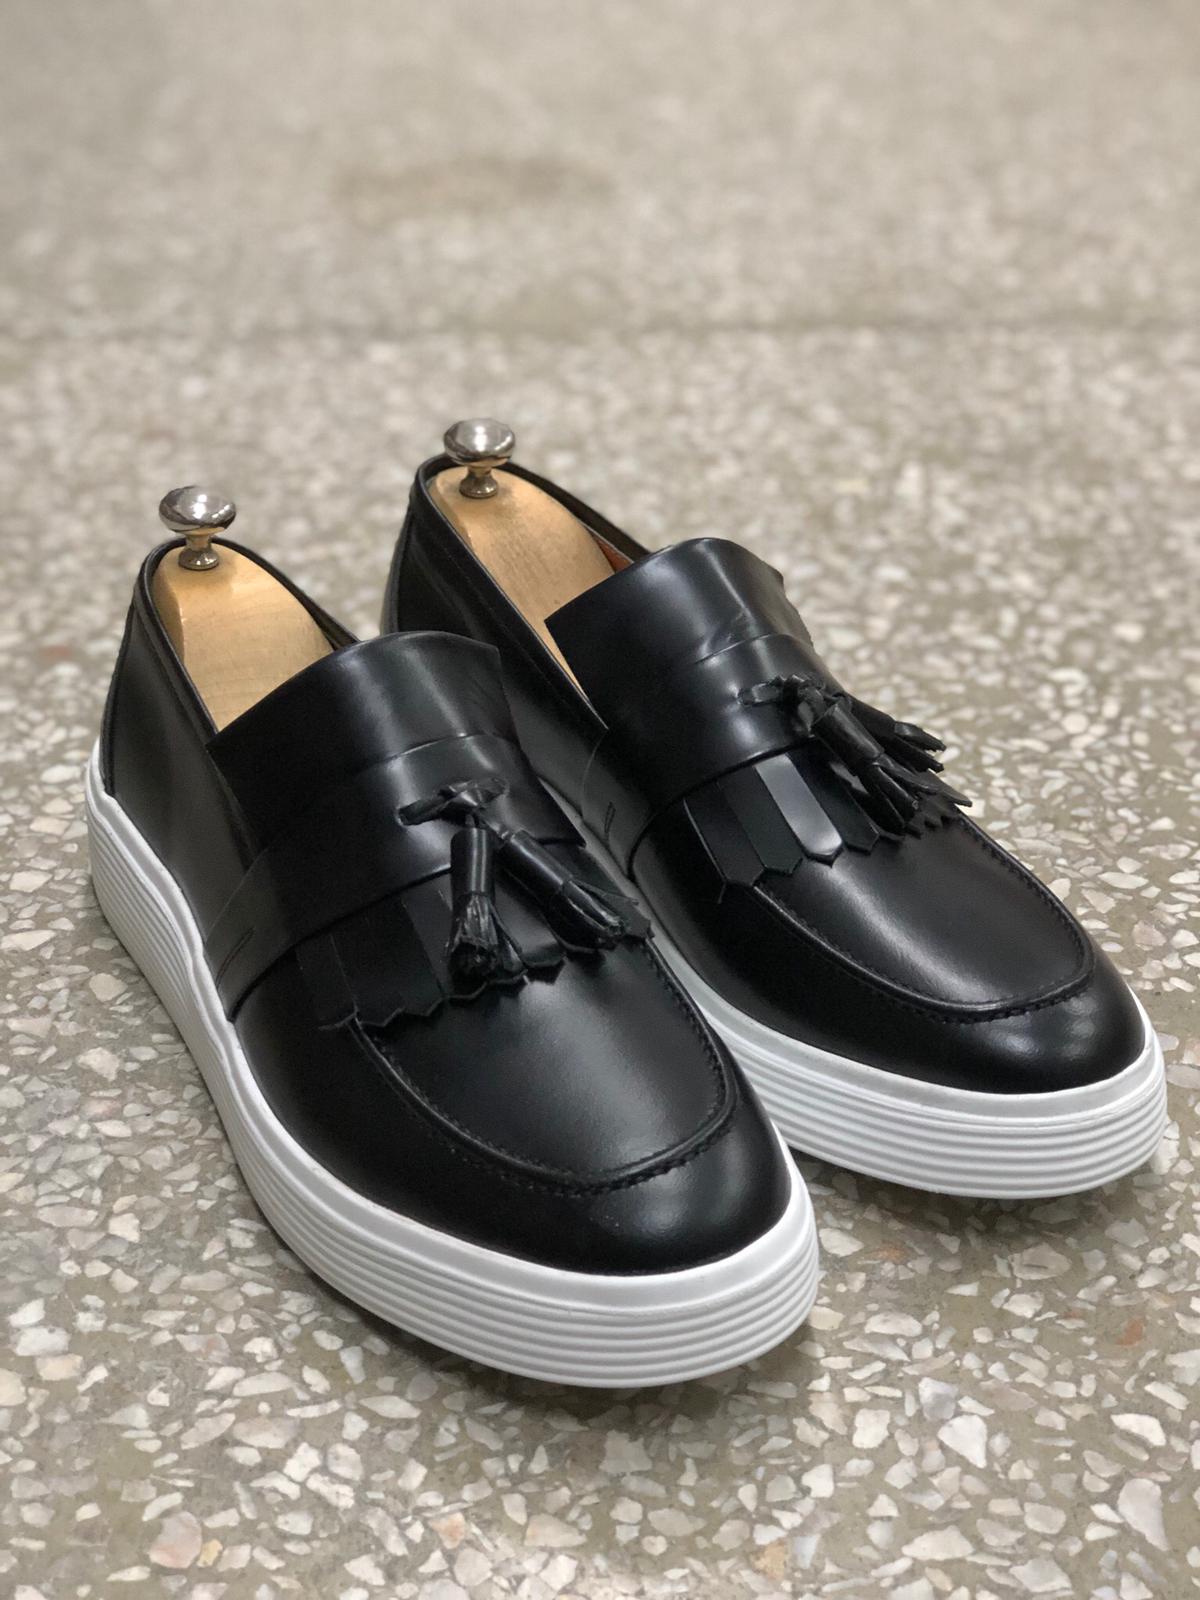 Calf-Leather Shoes in Black (Limited Edition) – BRABION